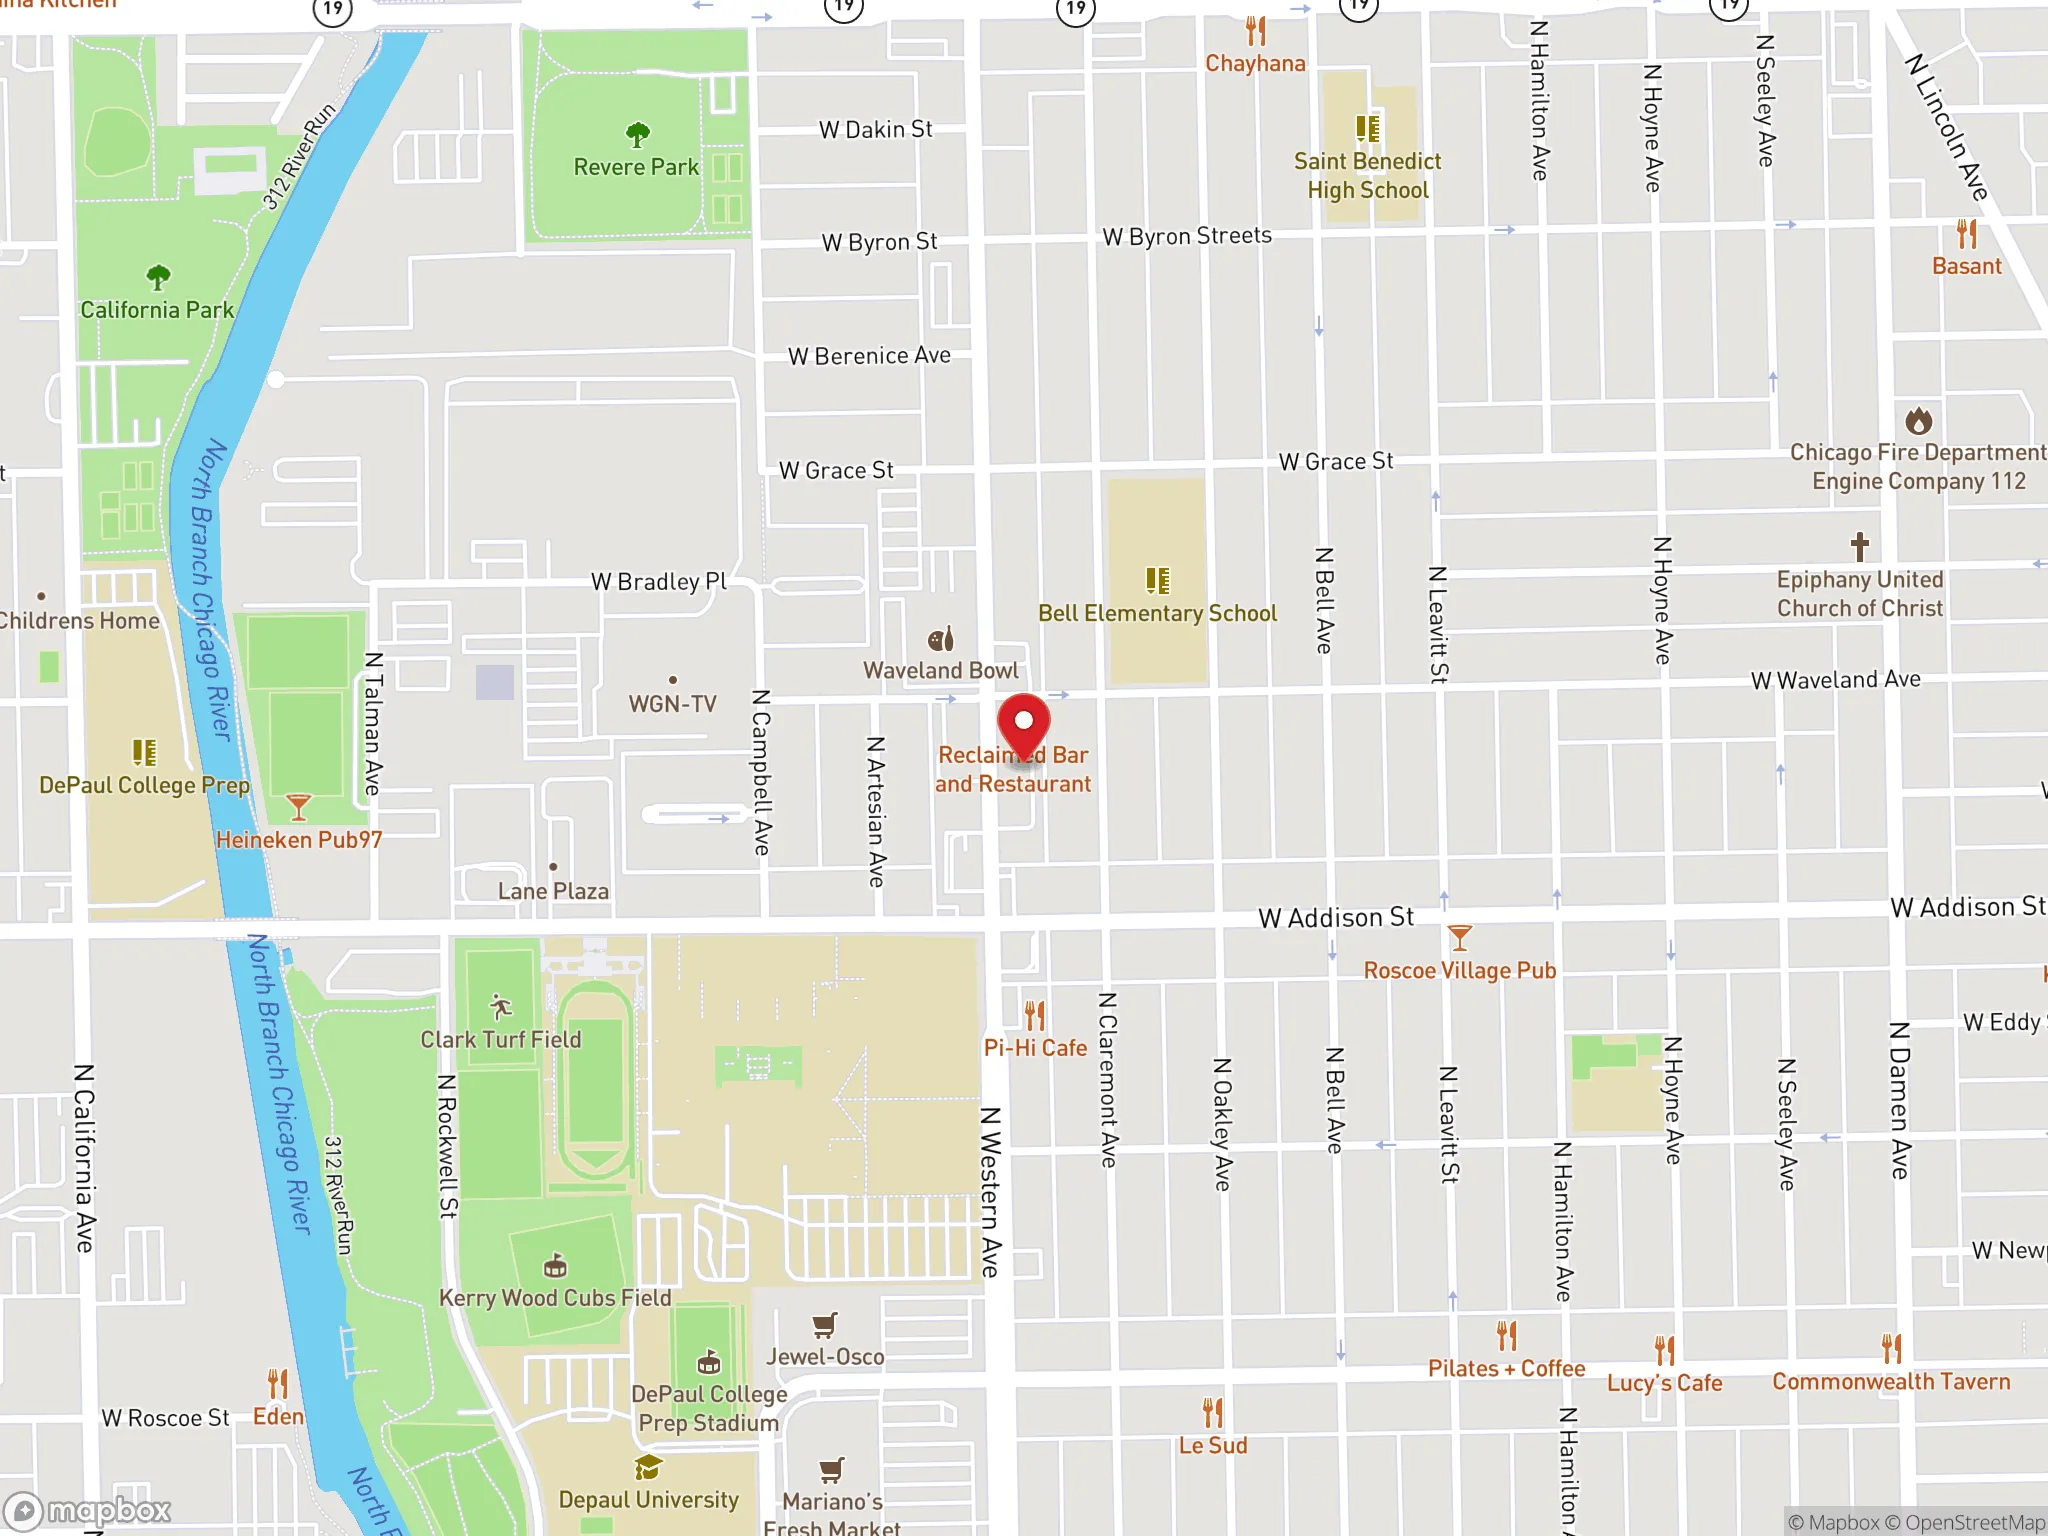 Map showing the location of a Dave's Hot Chicken restaurant on North Western Avenue in Chicago, IL.